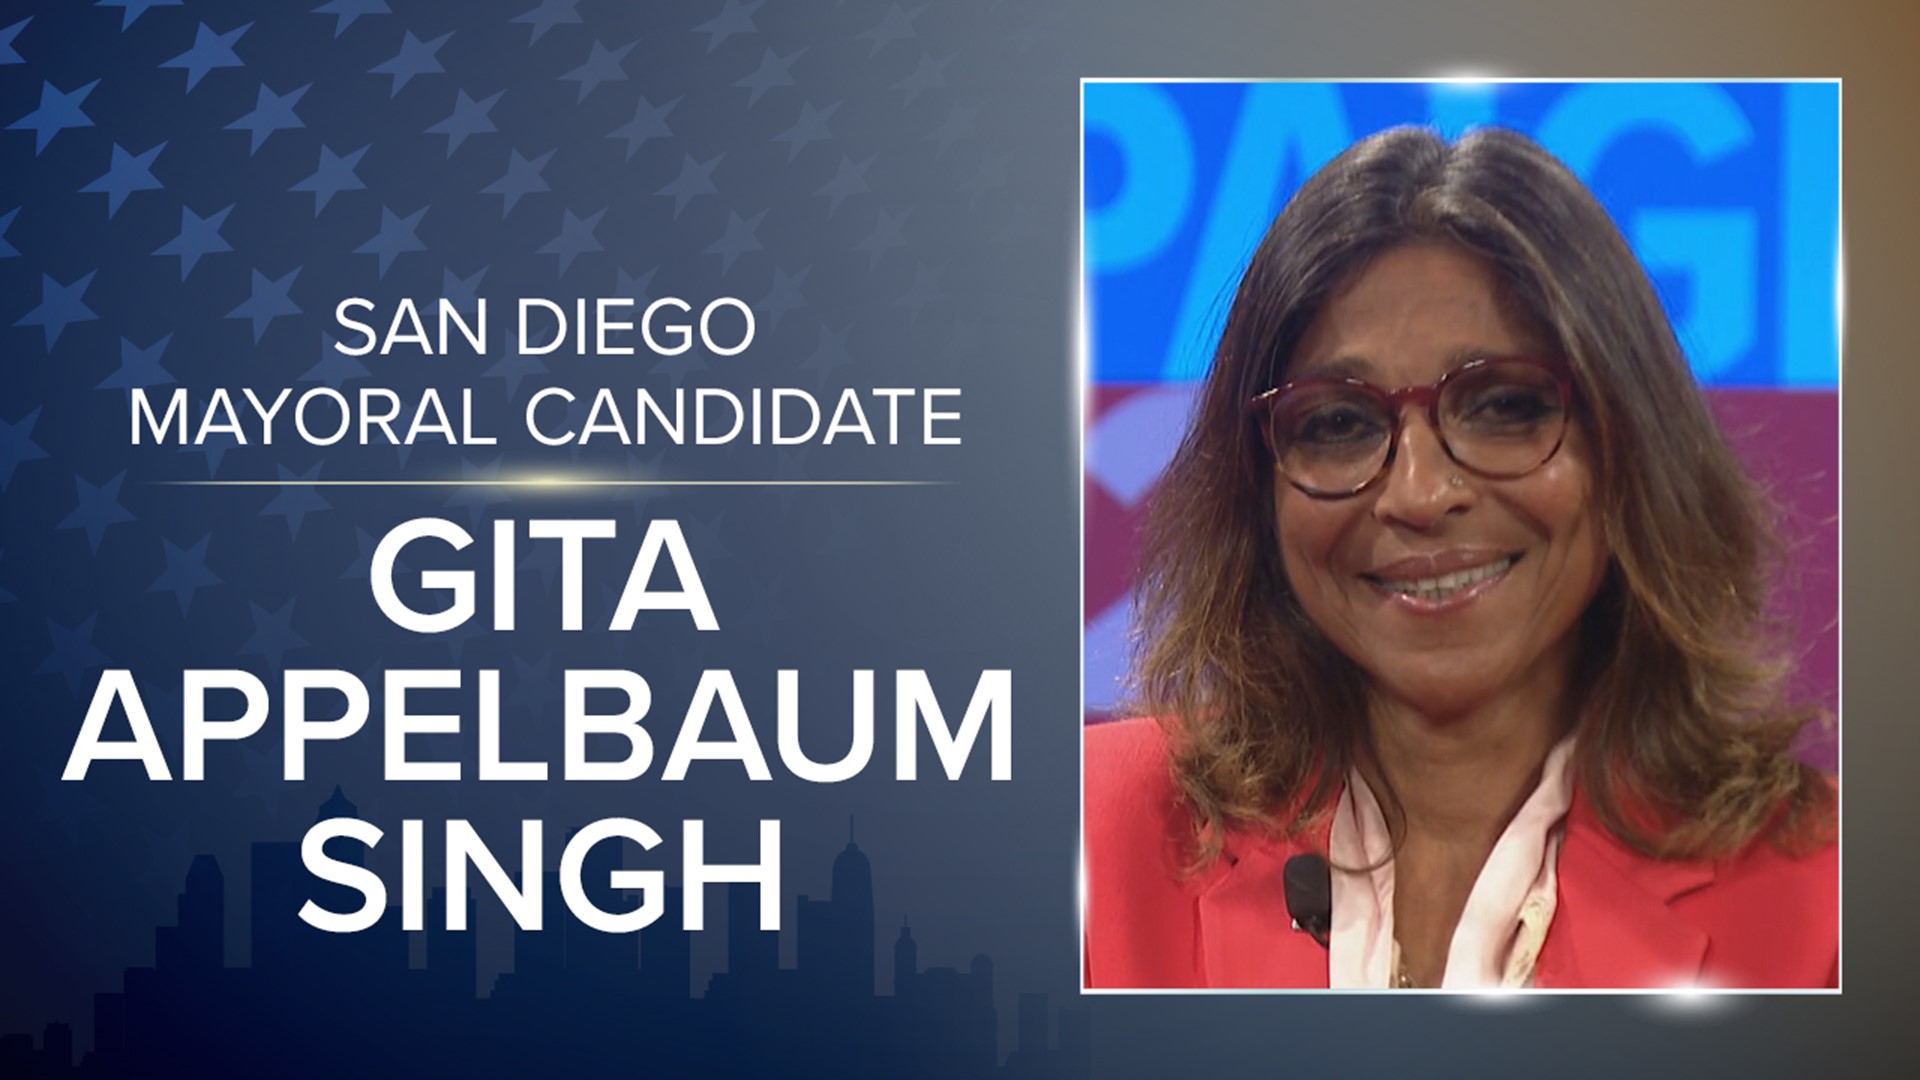 San Diegans will choose a new mayor on Tuesday, November 3. Hear what the candidates had to say.